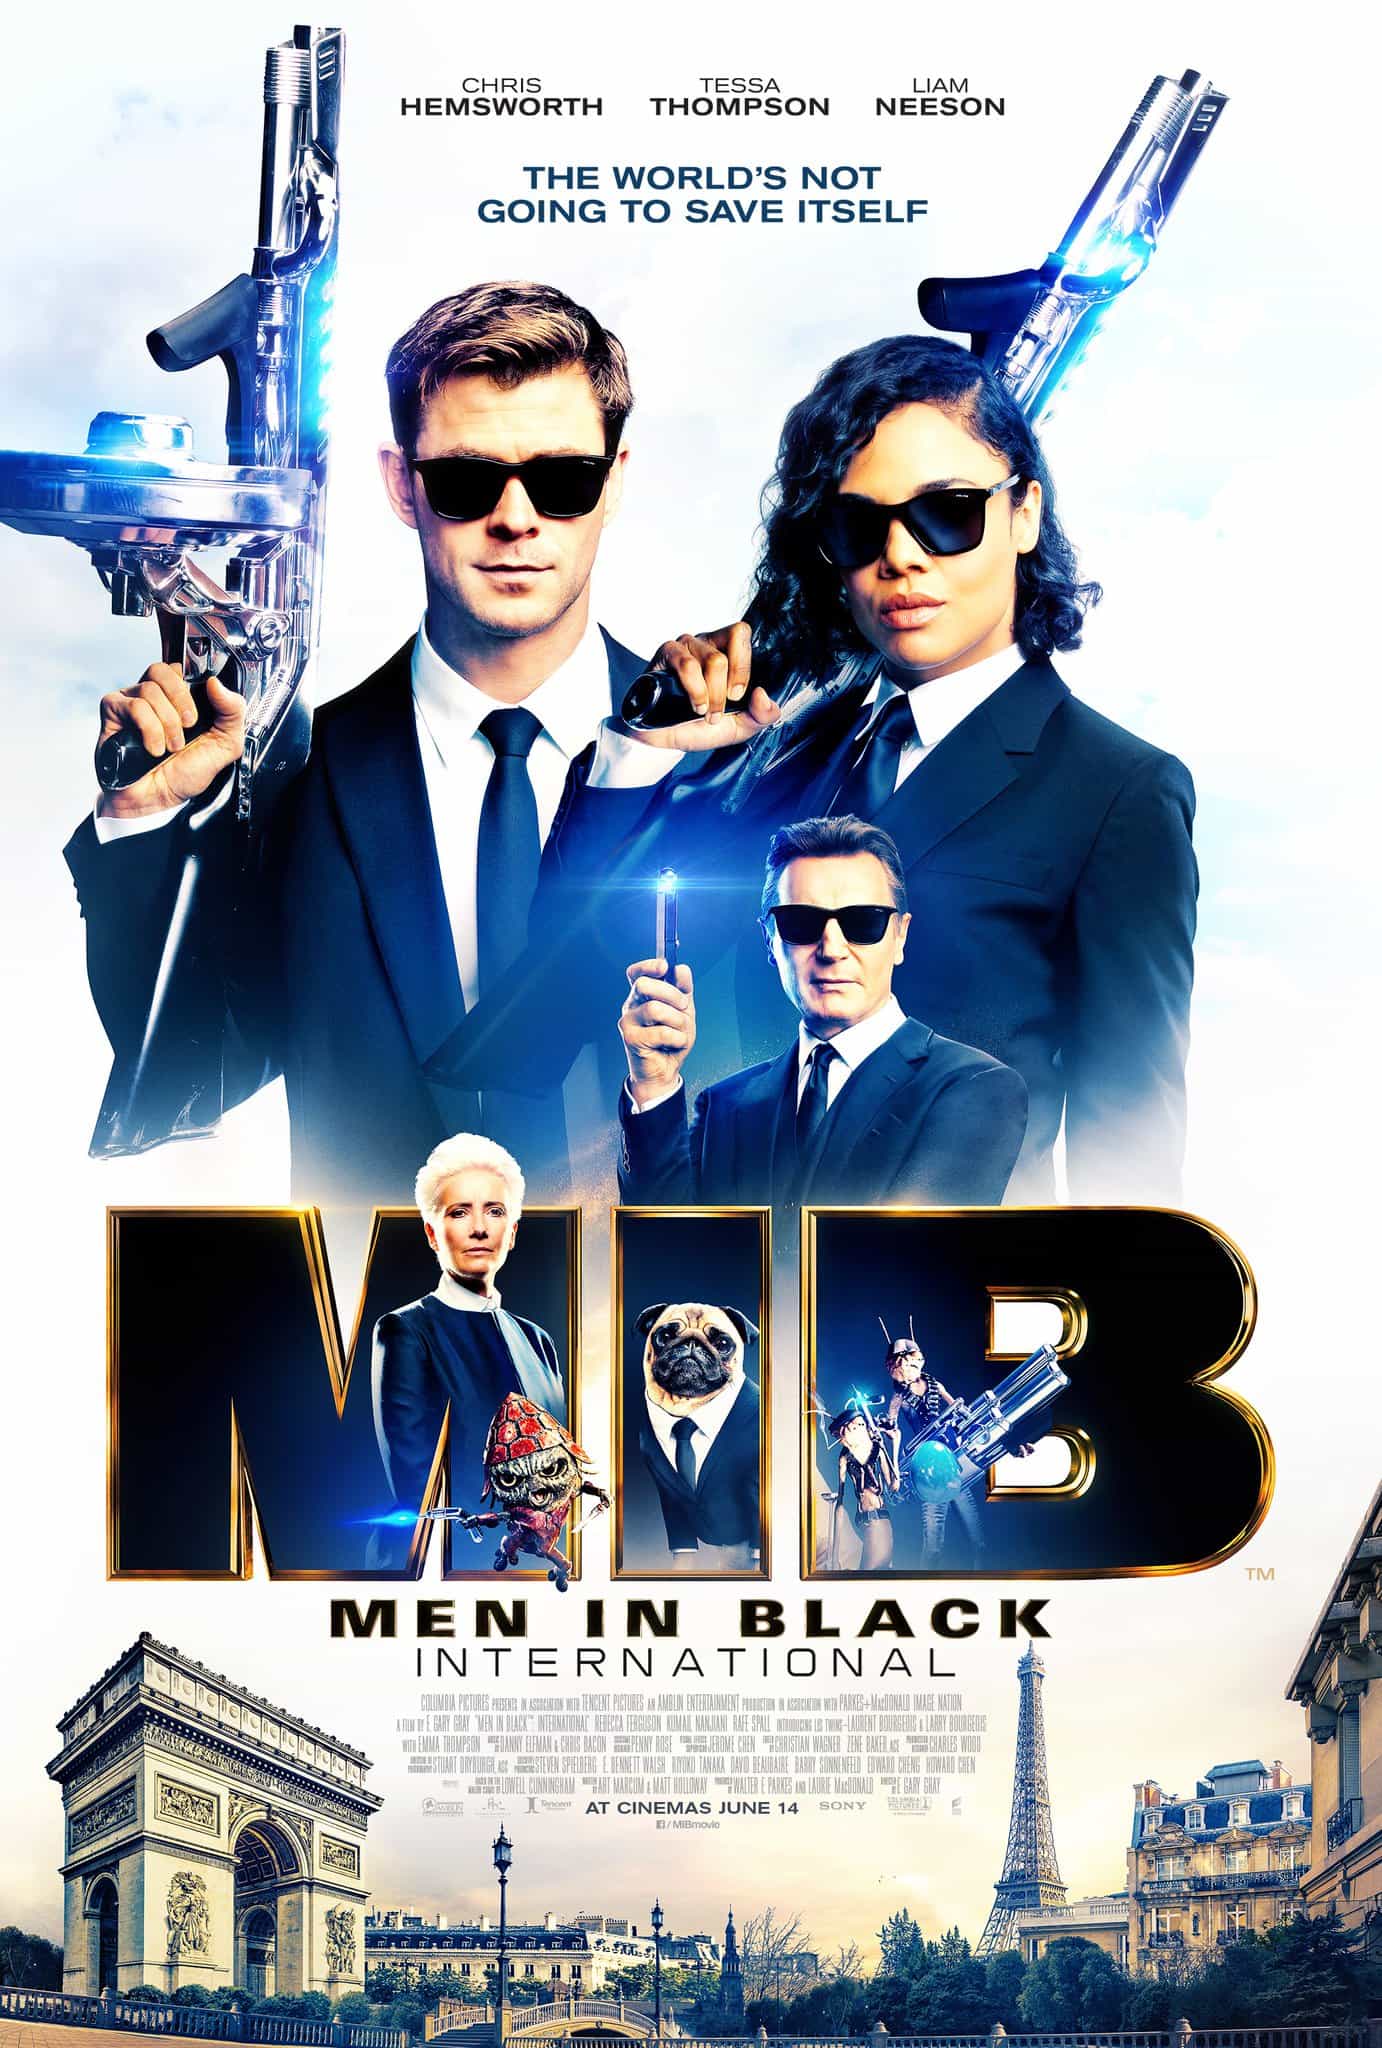 US Box Office Weekend Report 14th - 16th June 2019:  Men In Black: International makes its debut at the top with a $28 million opening weekend